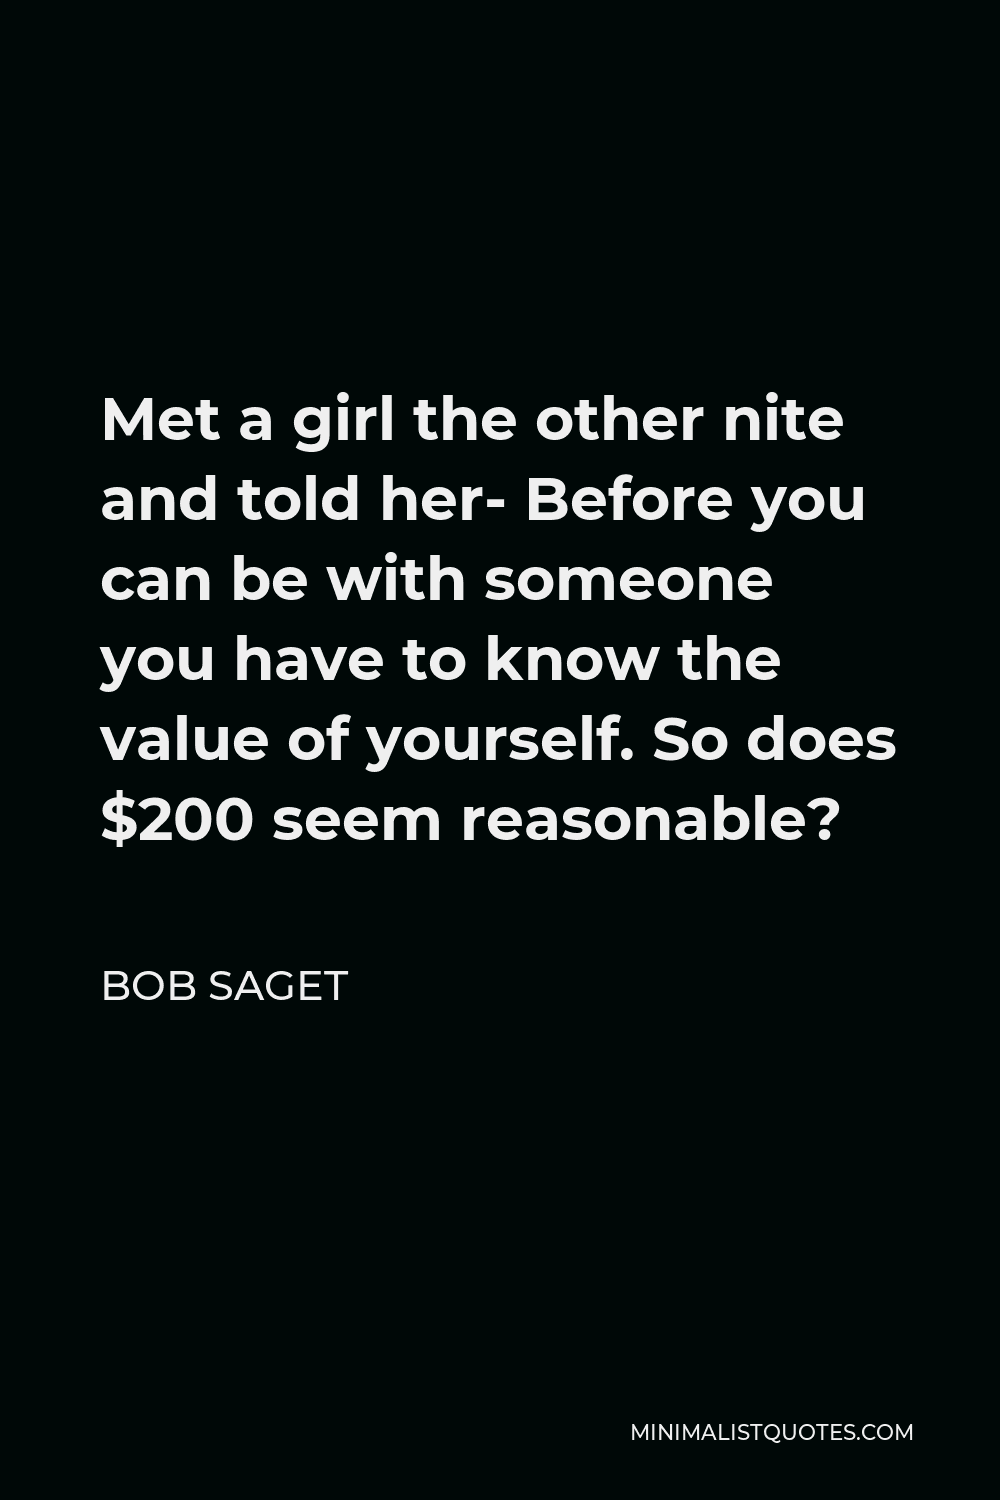 Bob Saget Quote - Met a girl the other nite and told her- Before you can be with someone you have to know the value of yourself. So does $200 seem reasonable?